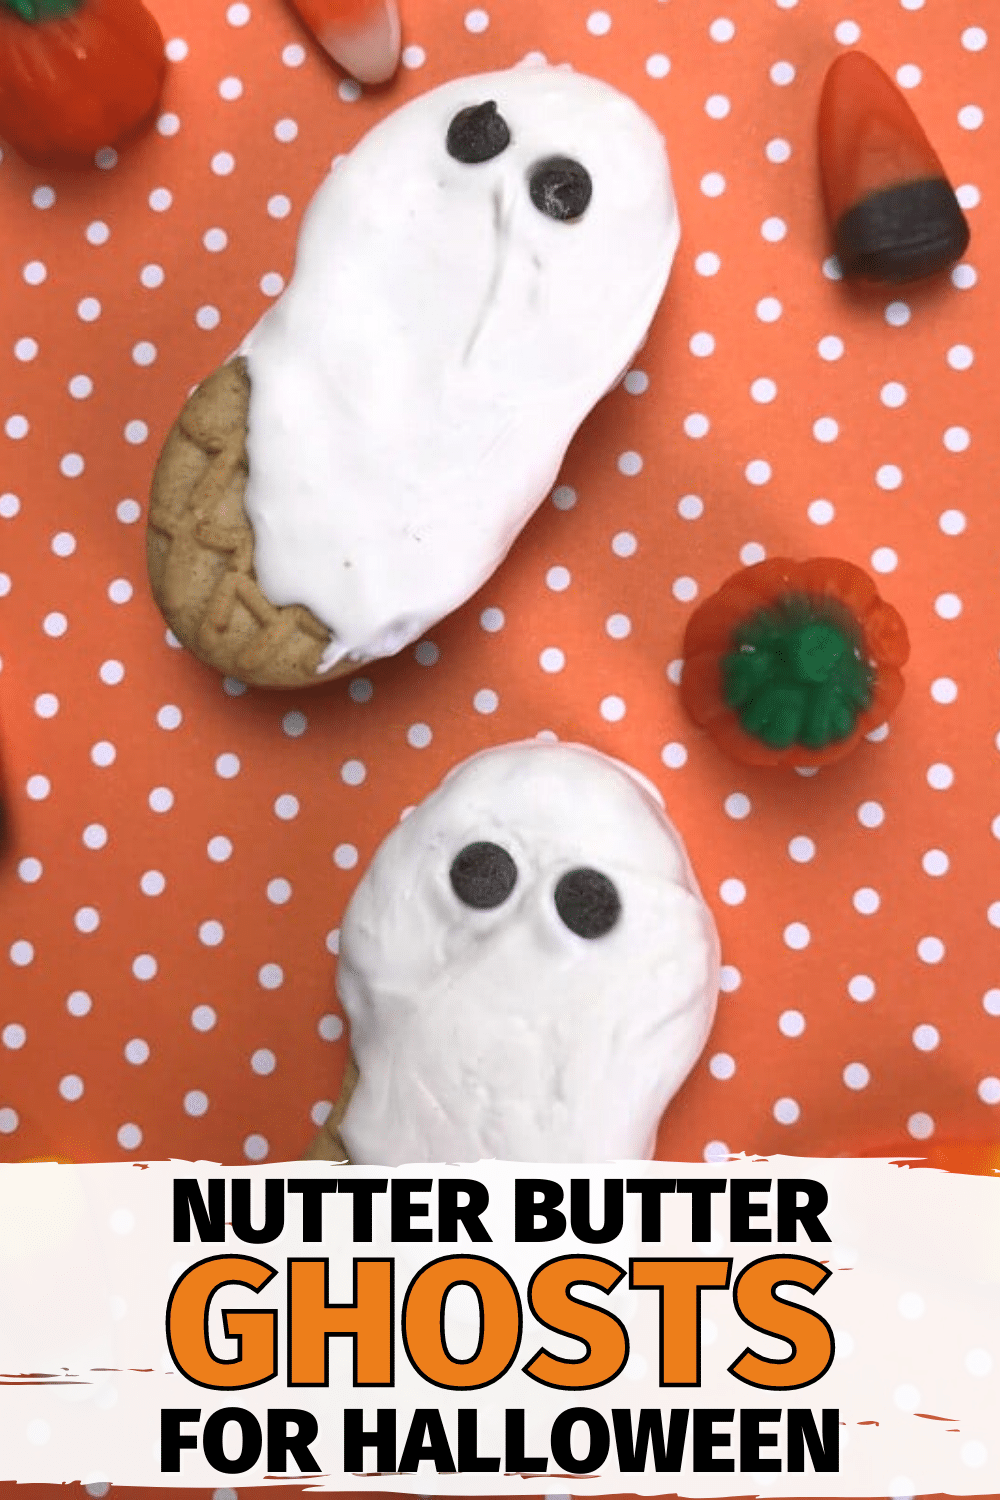 I can't get over how cute these Nutter Butter Ghosts are and how easy they are to make! These are going to be a blast to make with the kids. #halloween #funfoodforkids #easytreats via @wondermomwannab